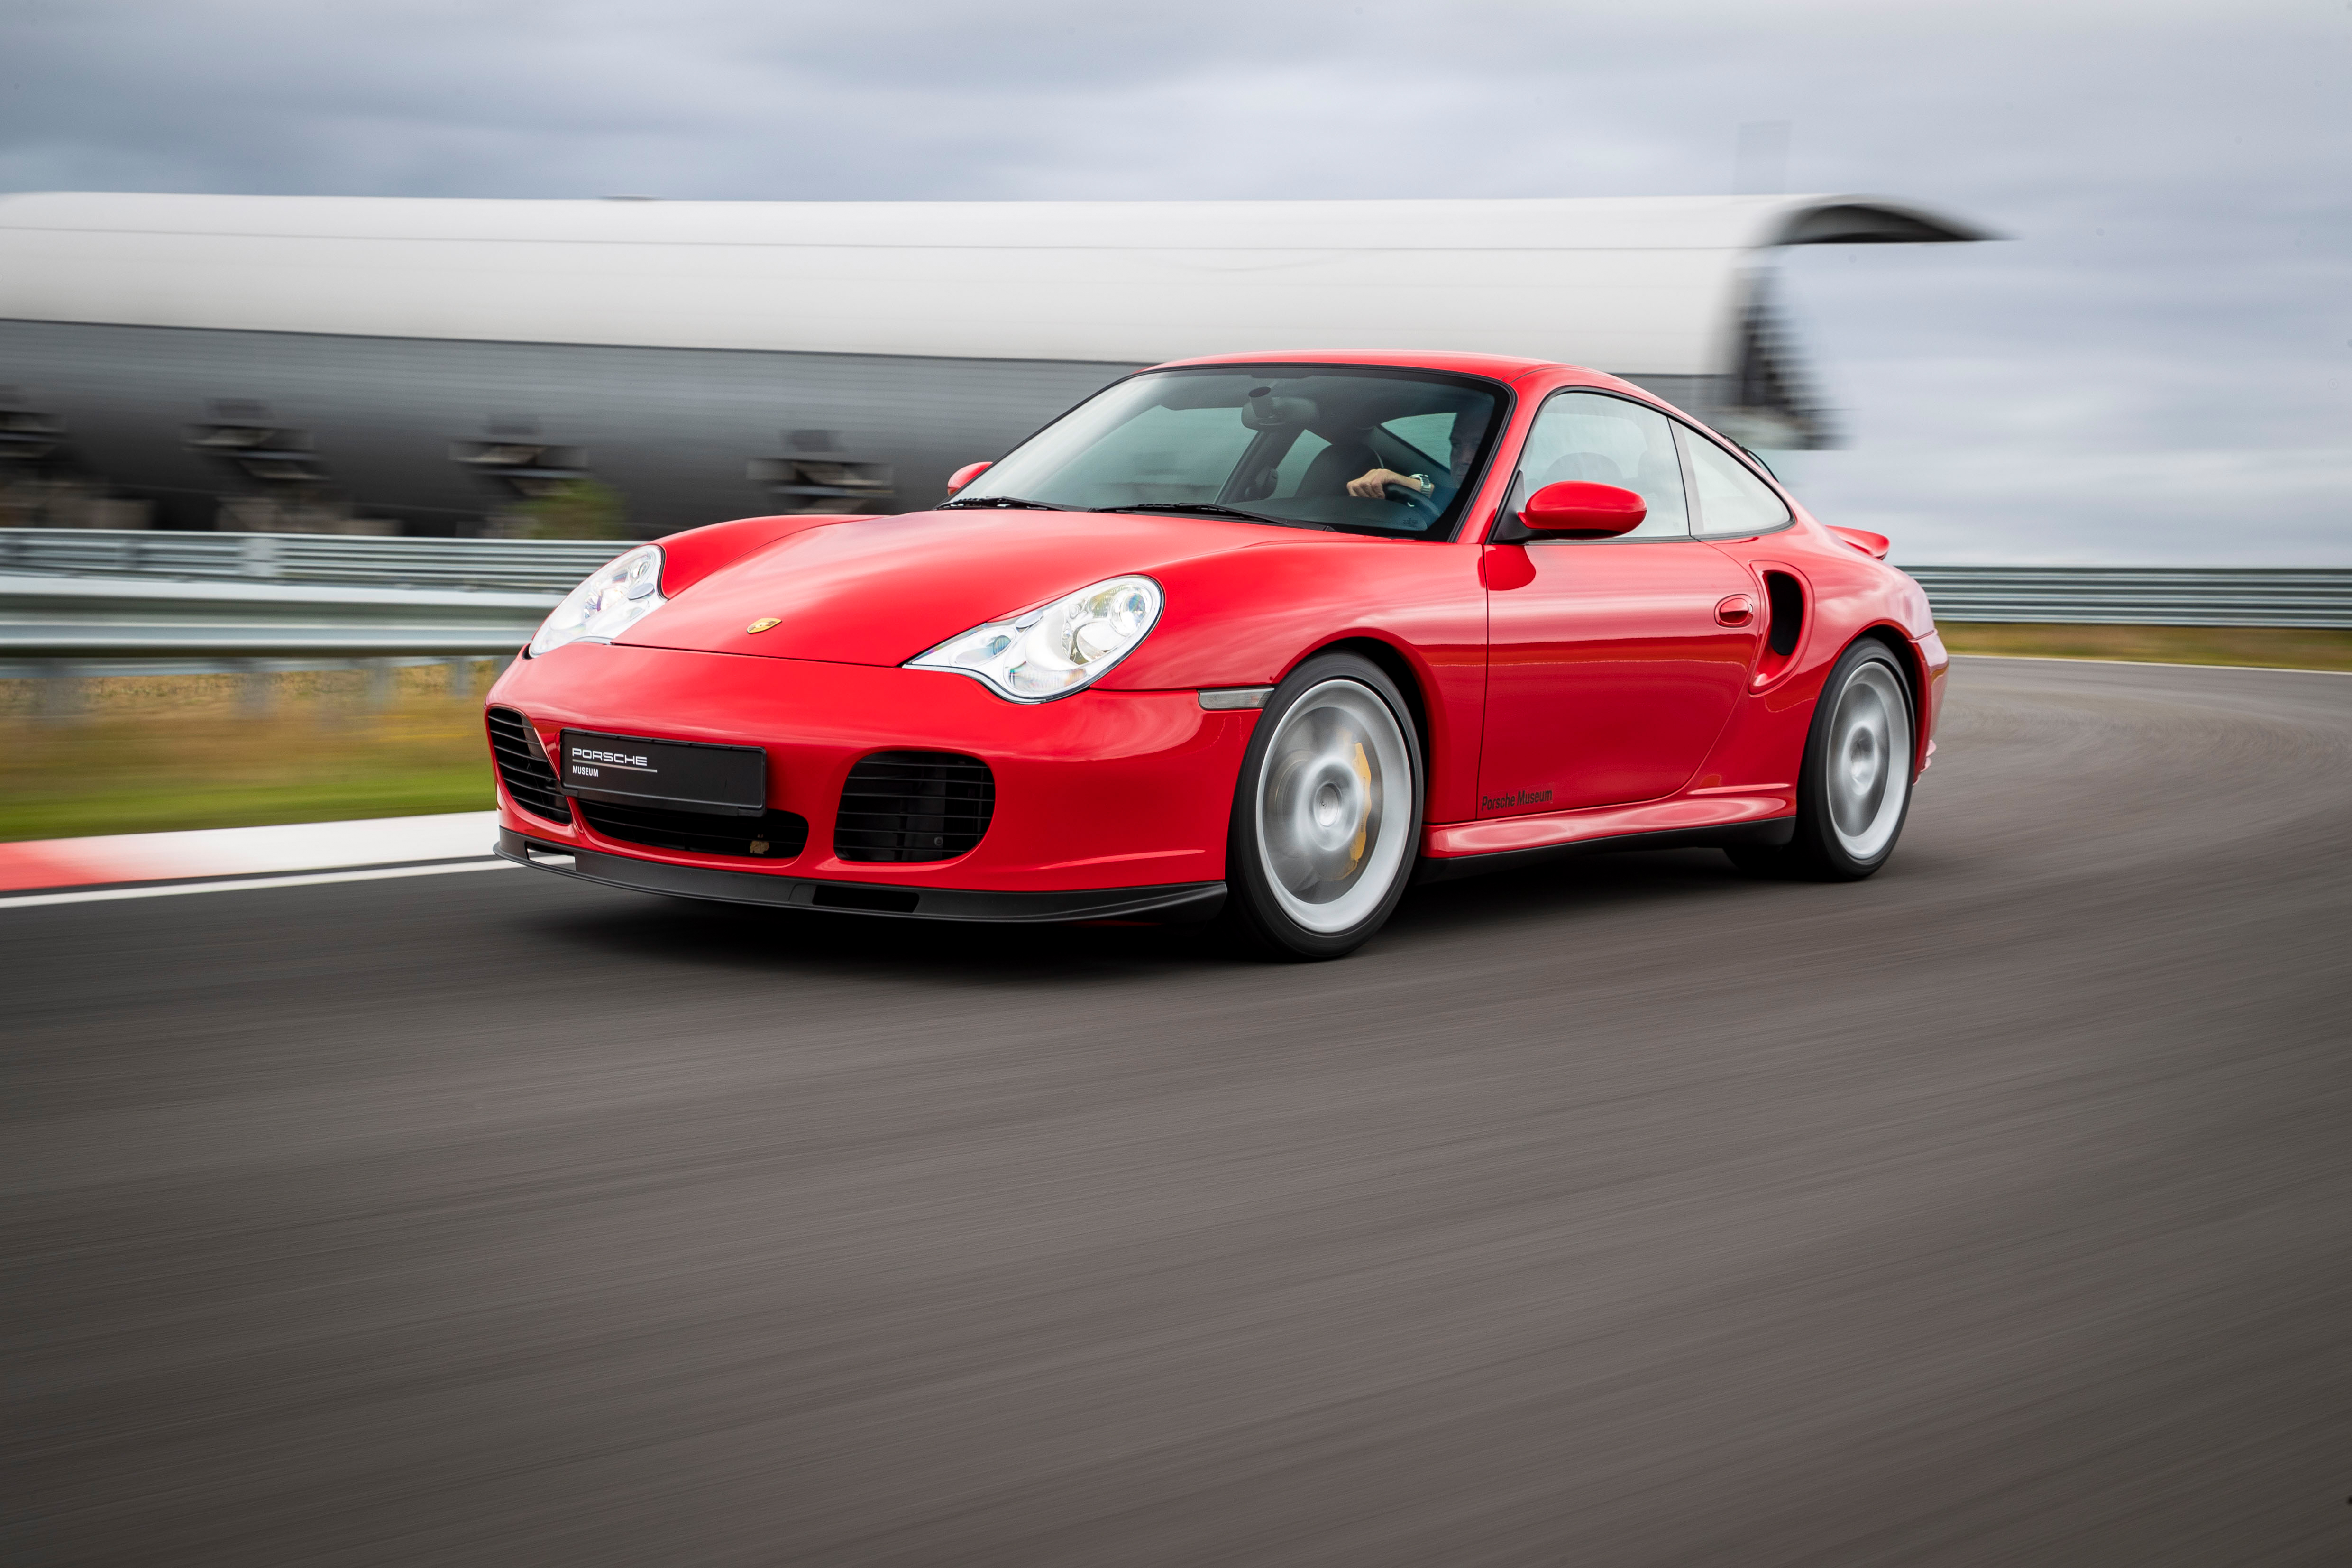 Front view of red Porsche 911 Turbo on racetrack